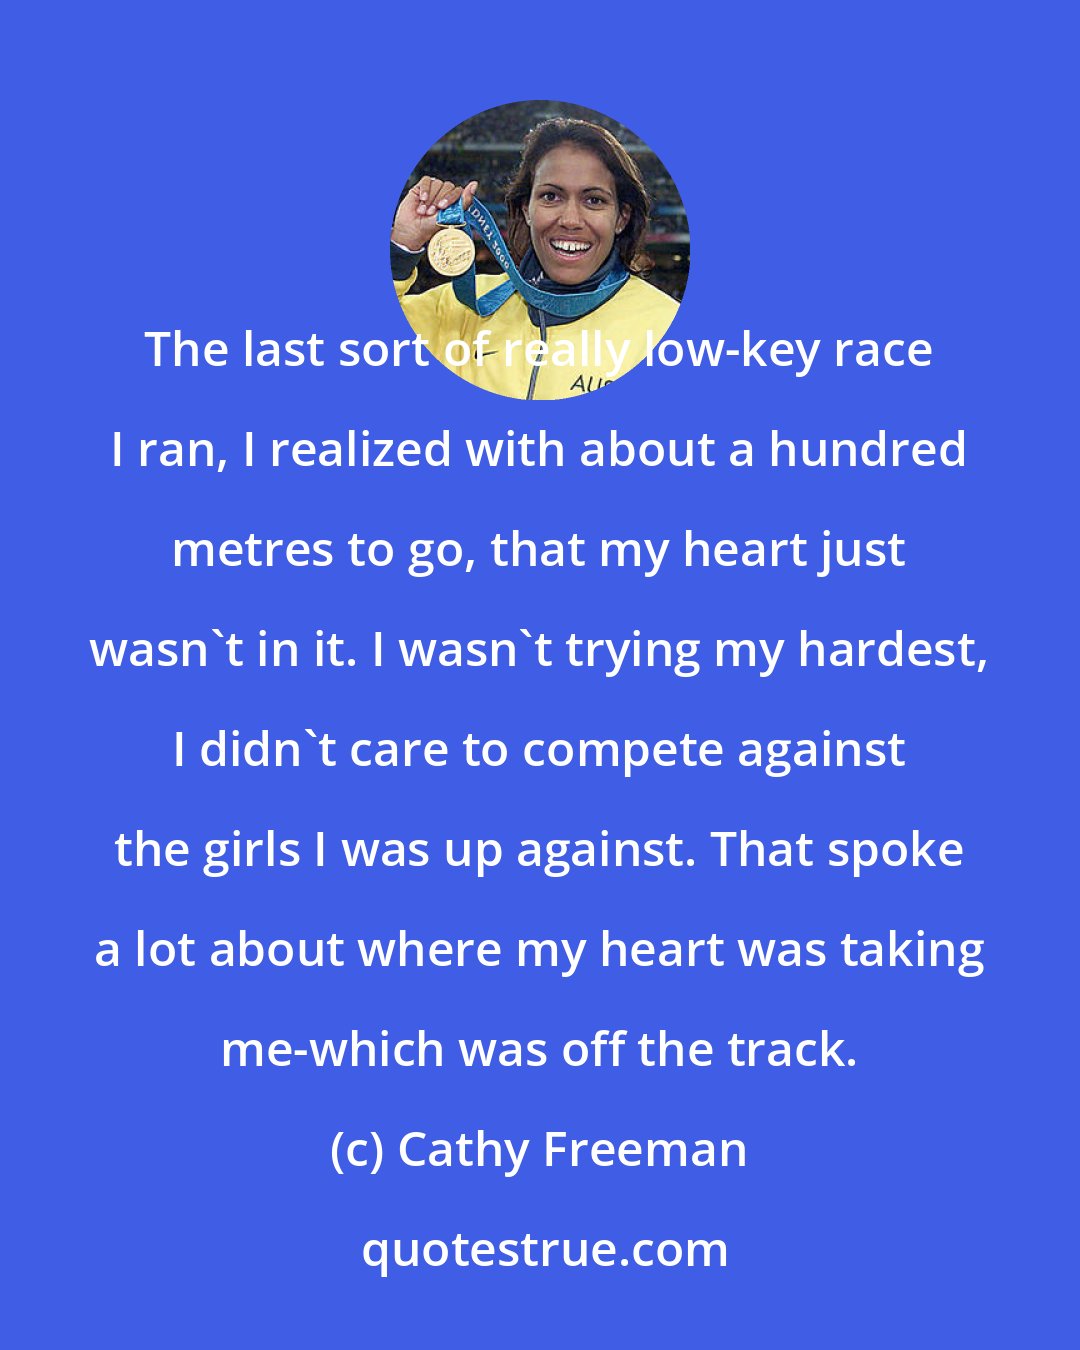 Cathy Freeman: The last sort of really low-key race I ran, I realized with about a hundred metres to go, that my heart just wasn't in it. I wasn't trying my hardest, I didn't care to compete against the girls I was up against. That spoke a lot about where my heart was taking me-which was off the track.